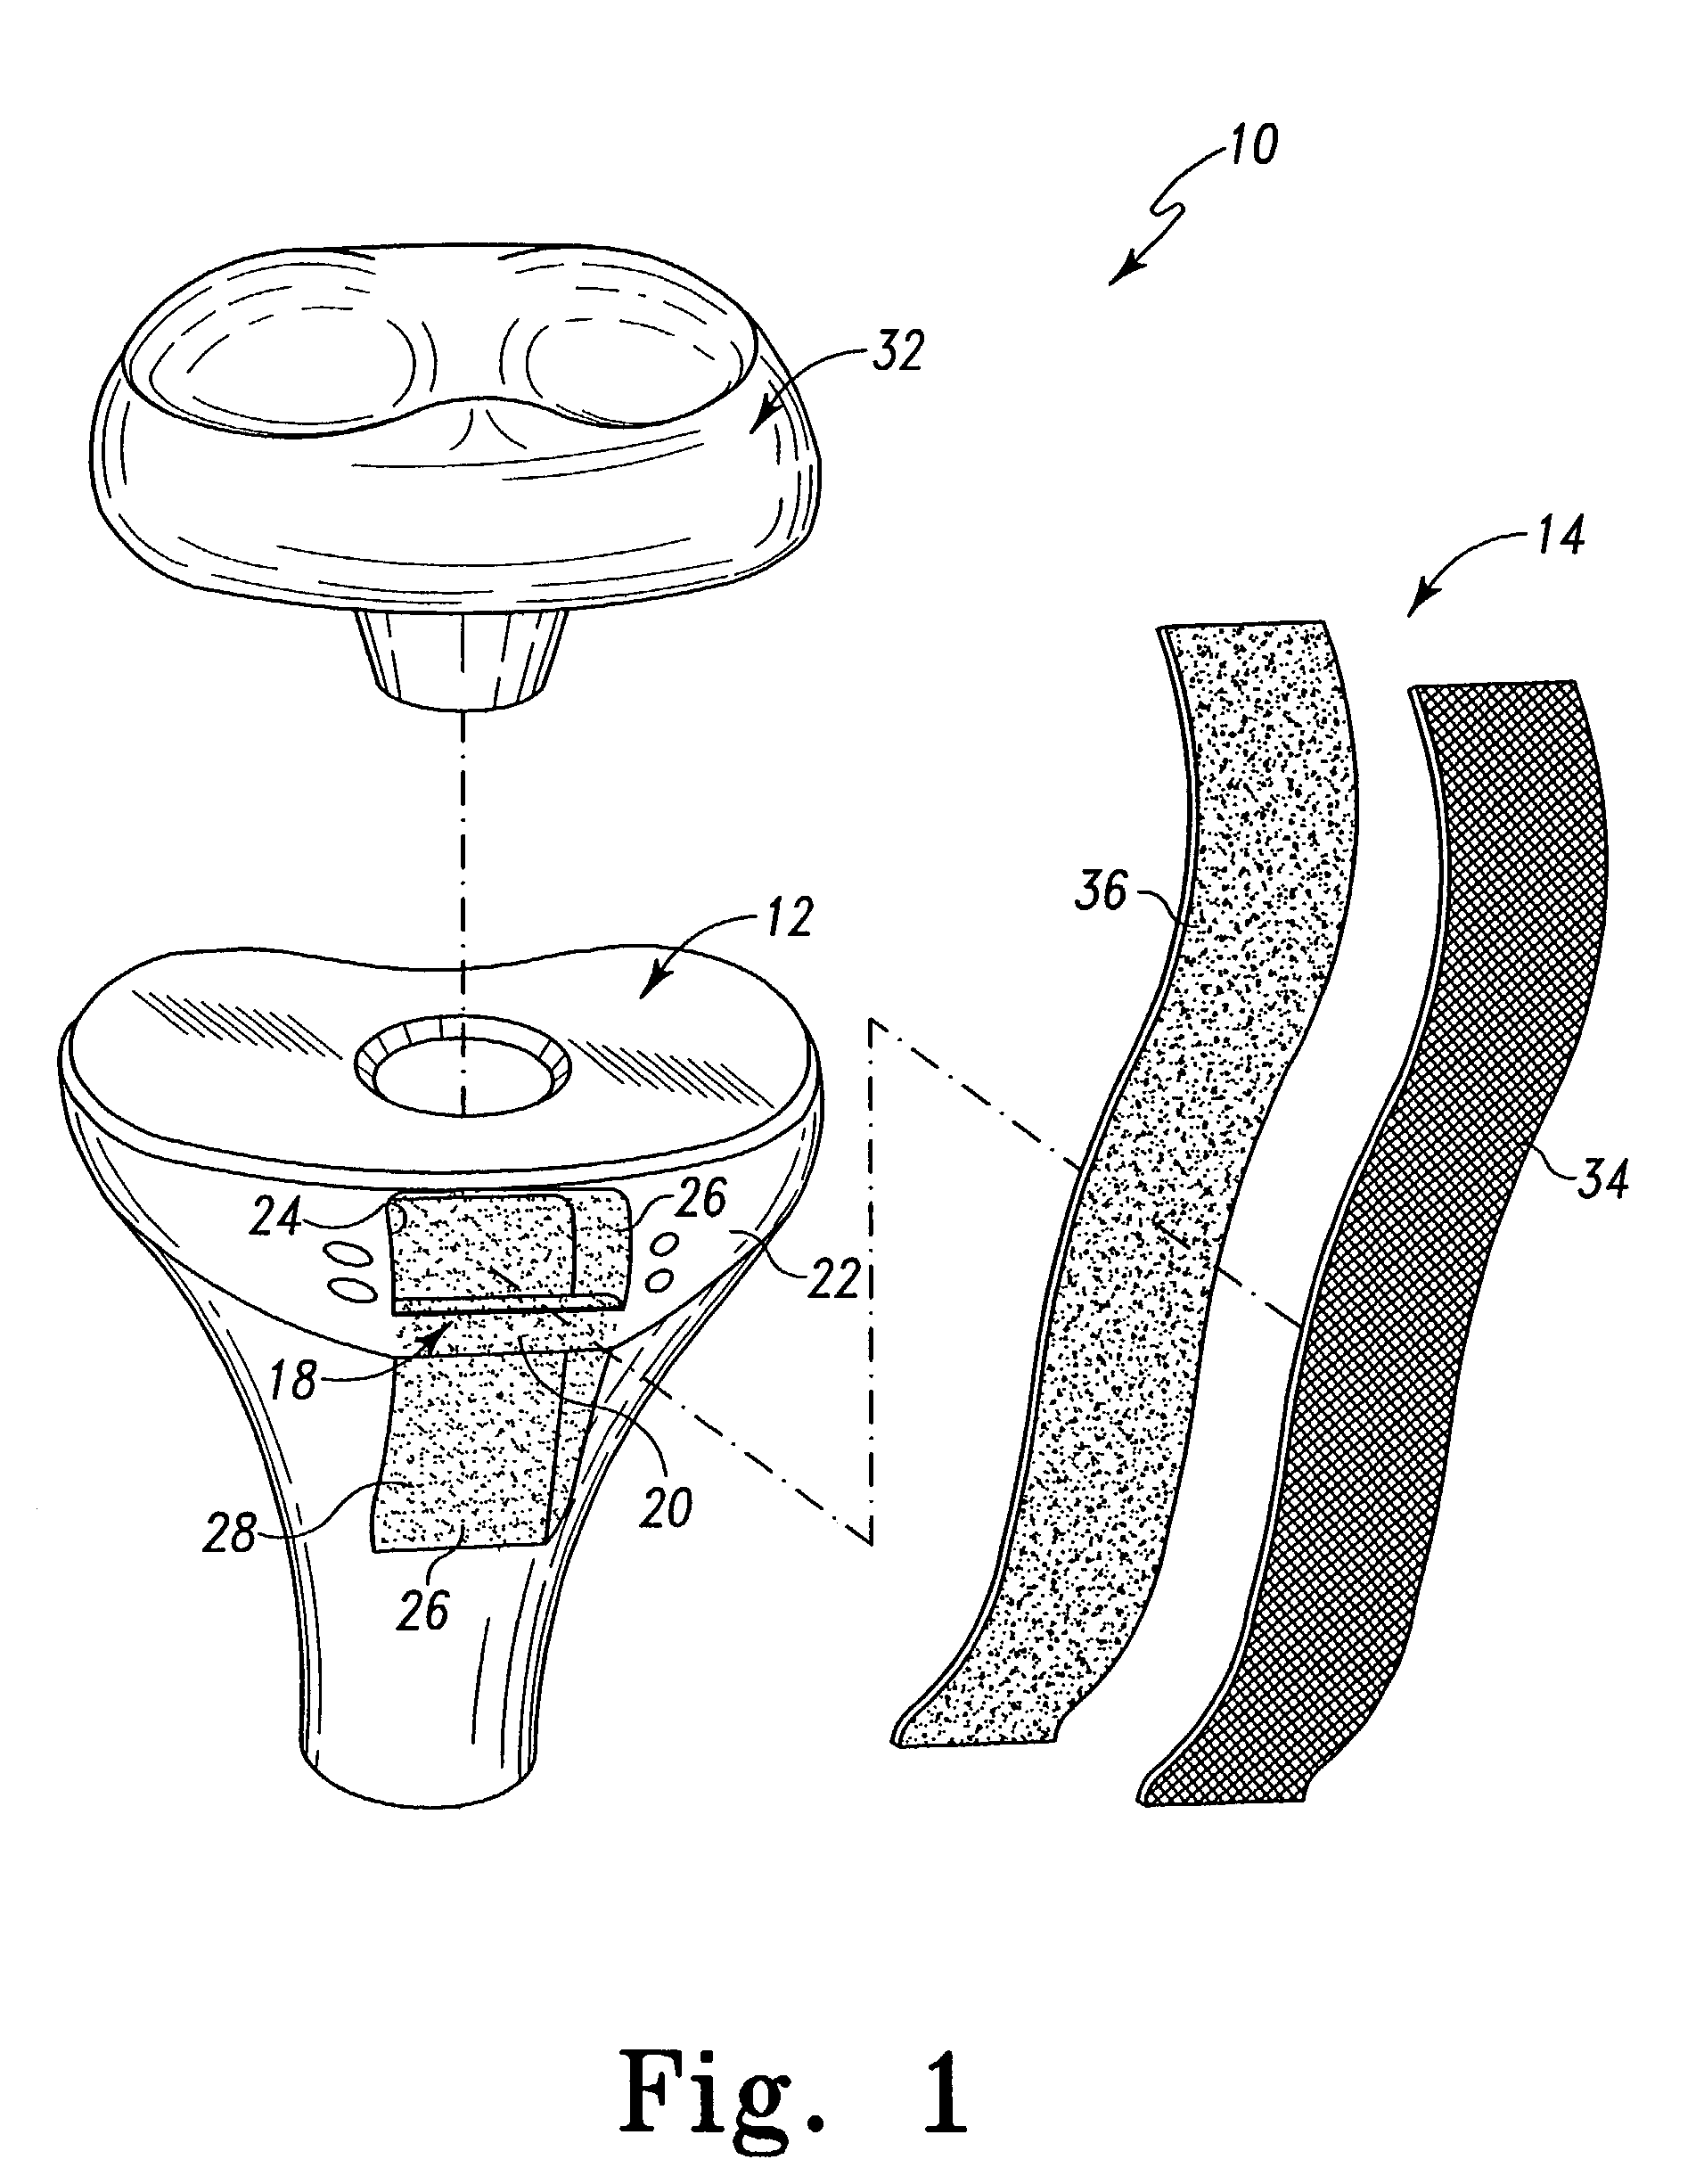 Method for securing soft tissue to an artificial prosthesis